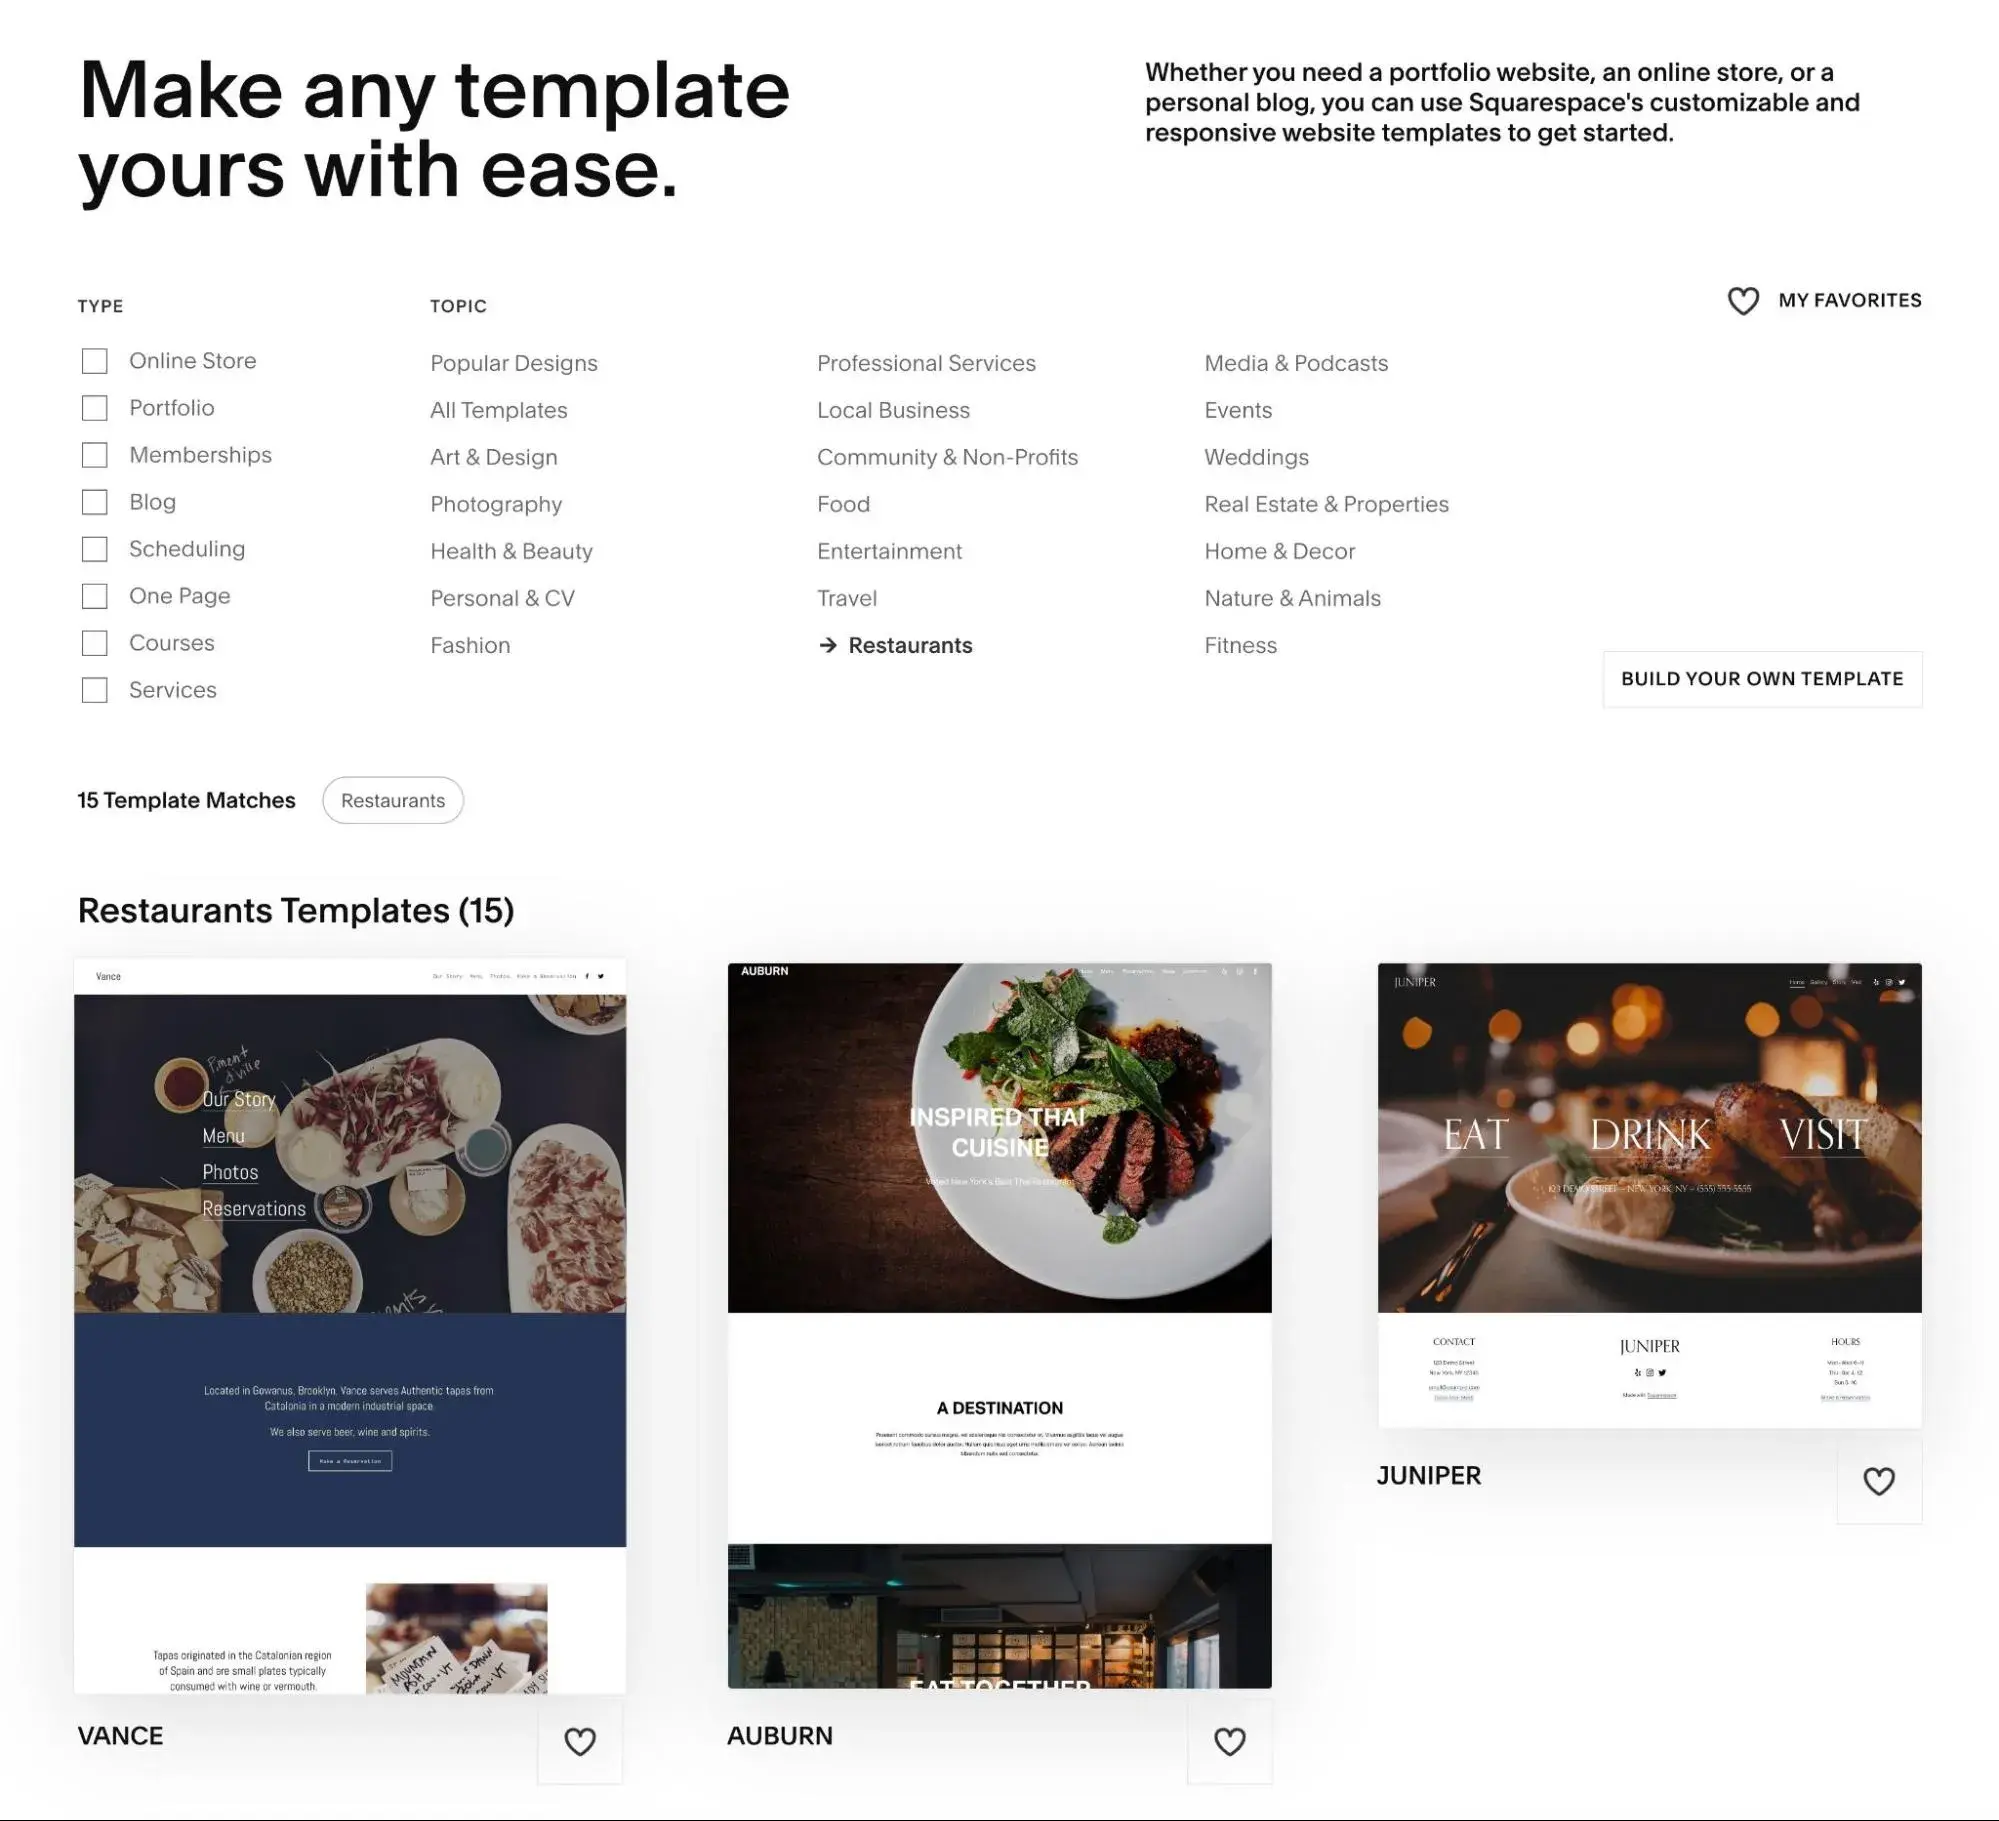 How to choose a Squarespace template for your website